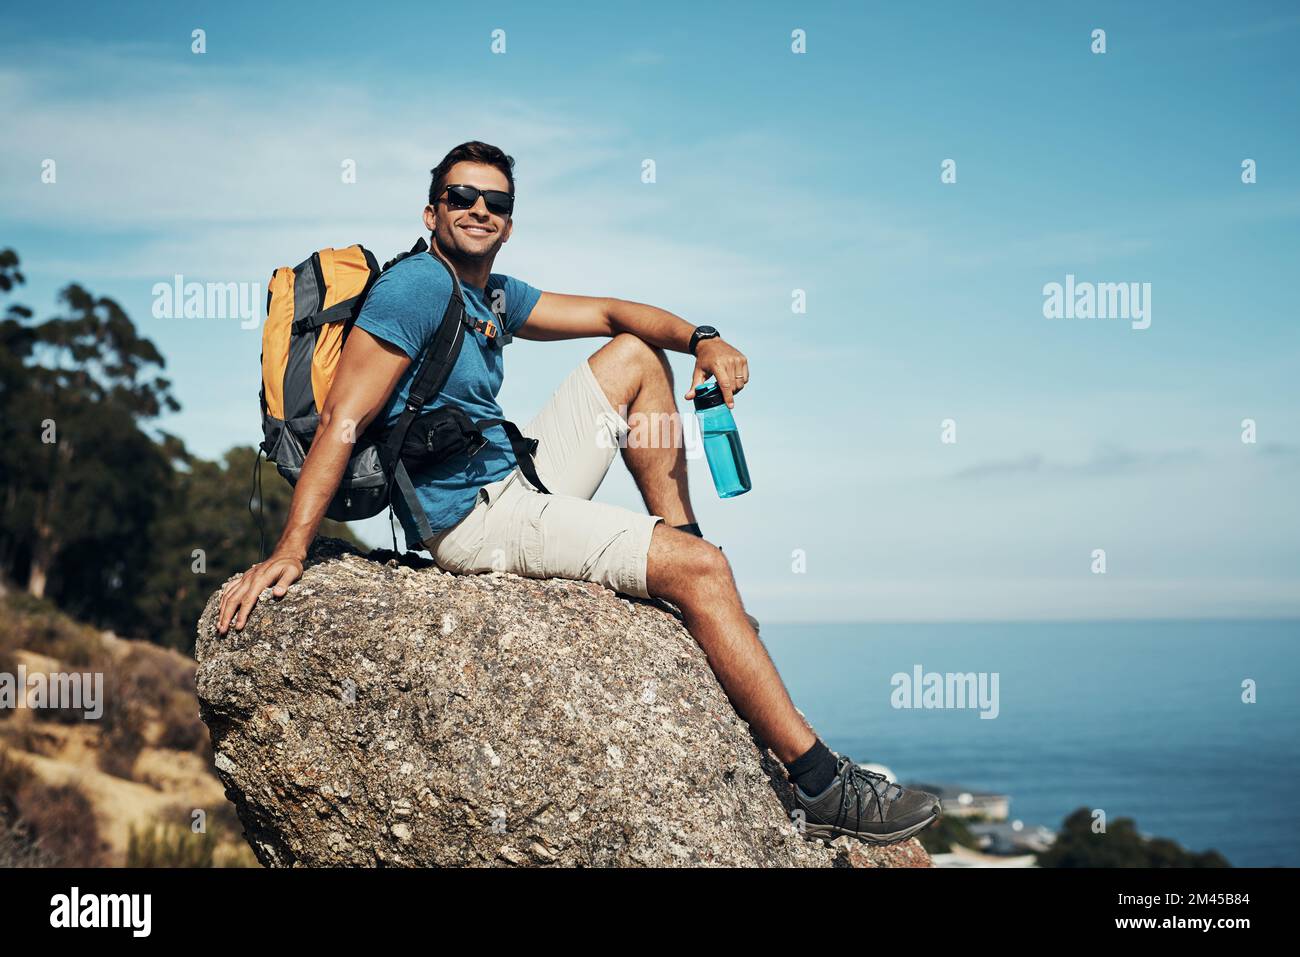 Im just hanging around. Portrait of a carefree young man taking a quick break from hiking up a mountain during the day. Stock Photo